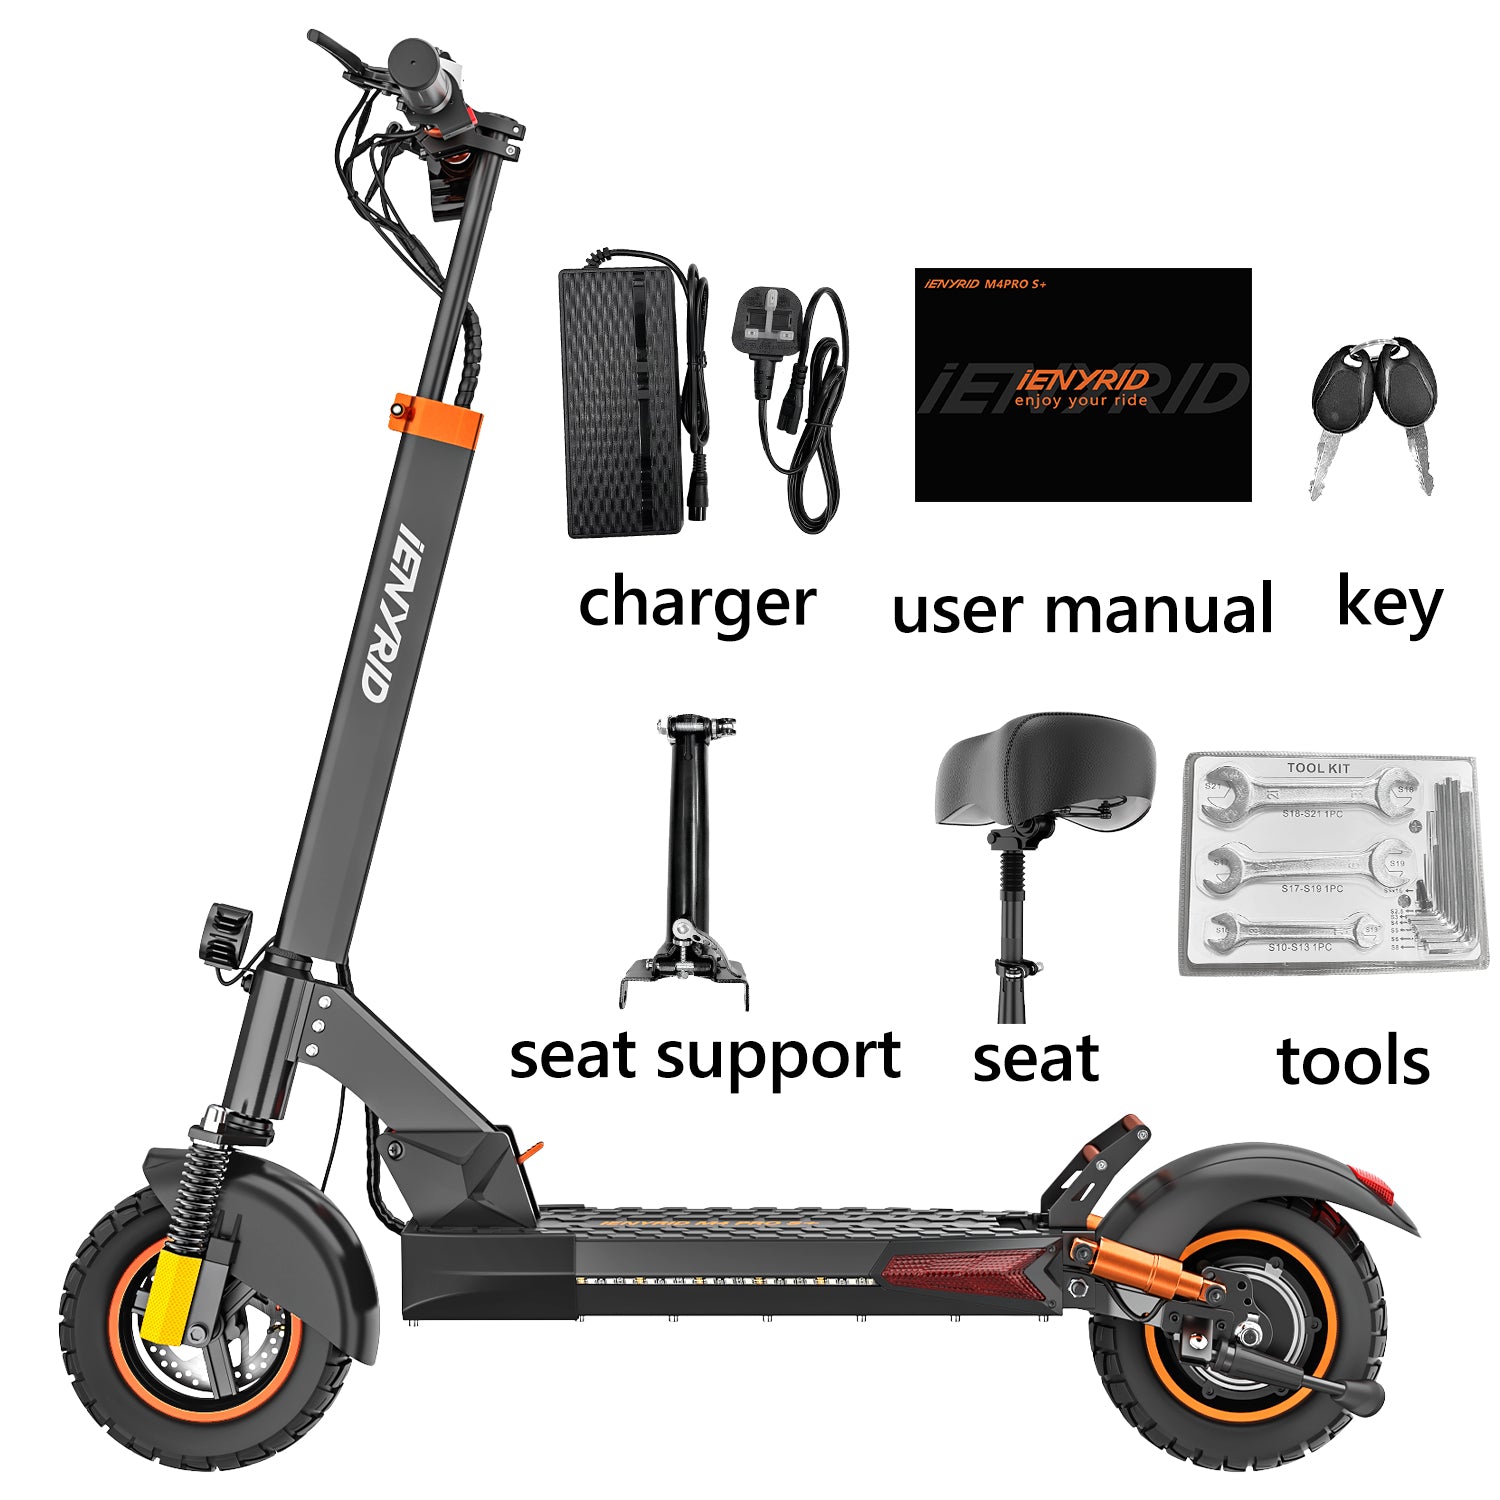 iENYRID M4 Pro S+ electric scooter off road all terrain in the box